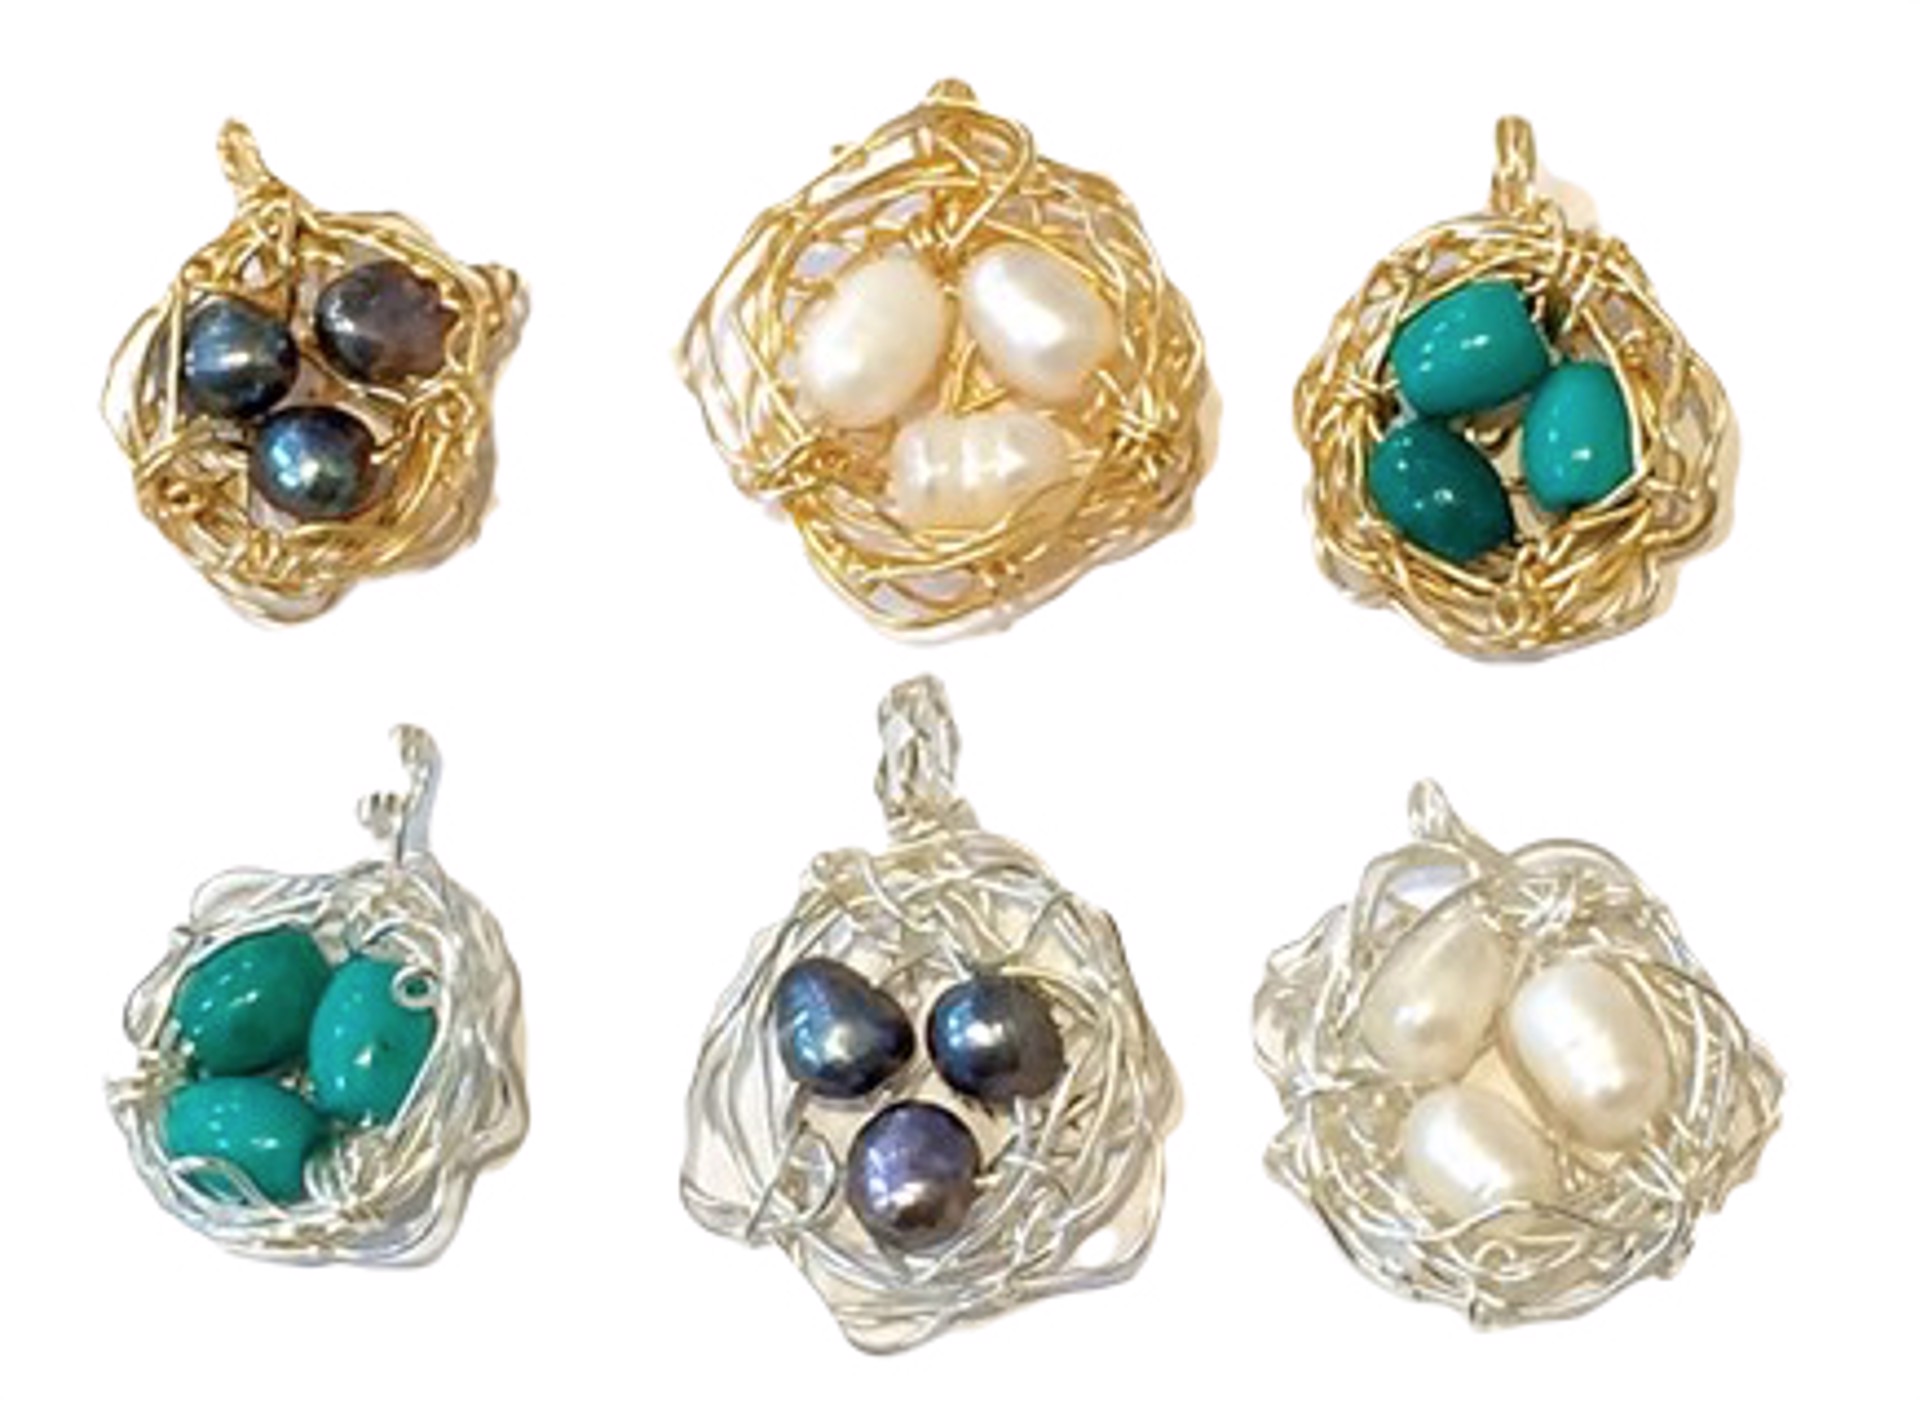 Pendant - Assorted Bird Nests by Kai Cook